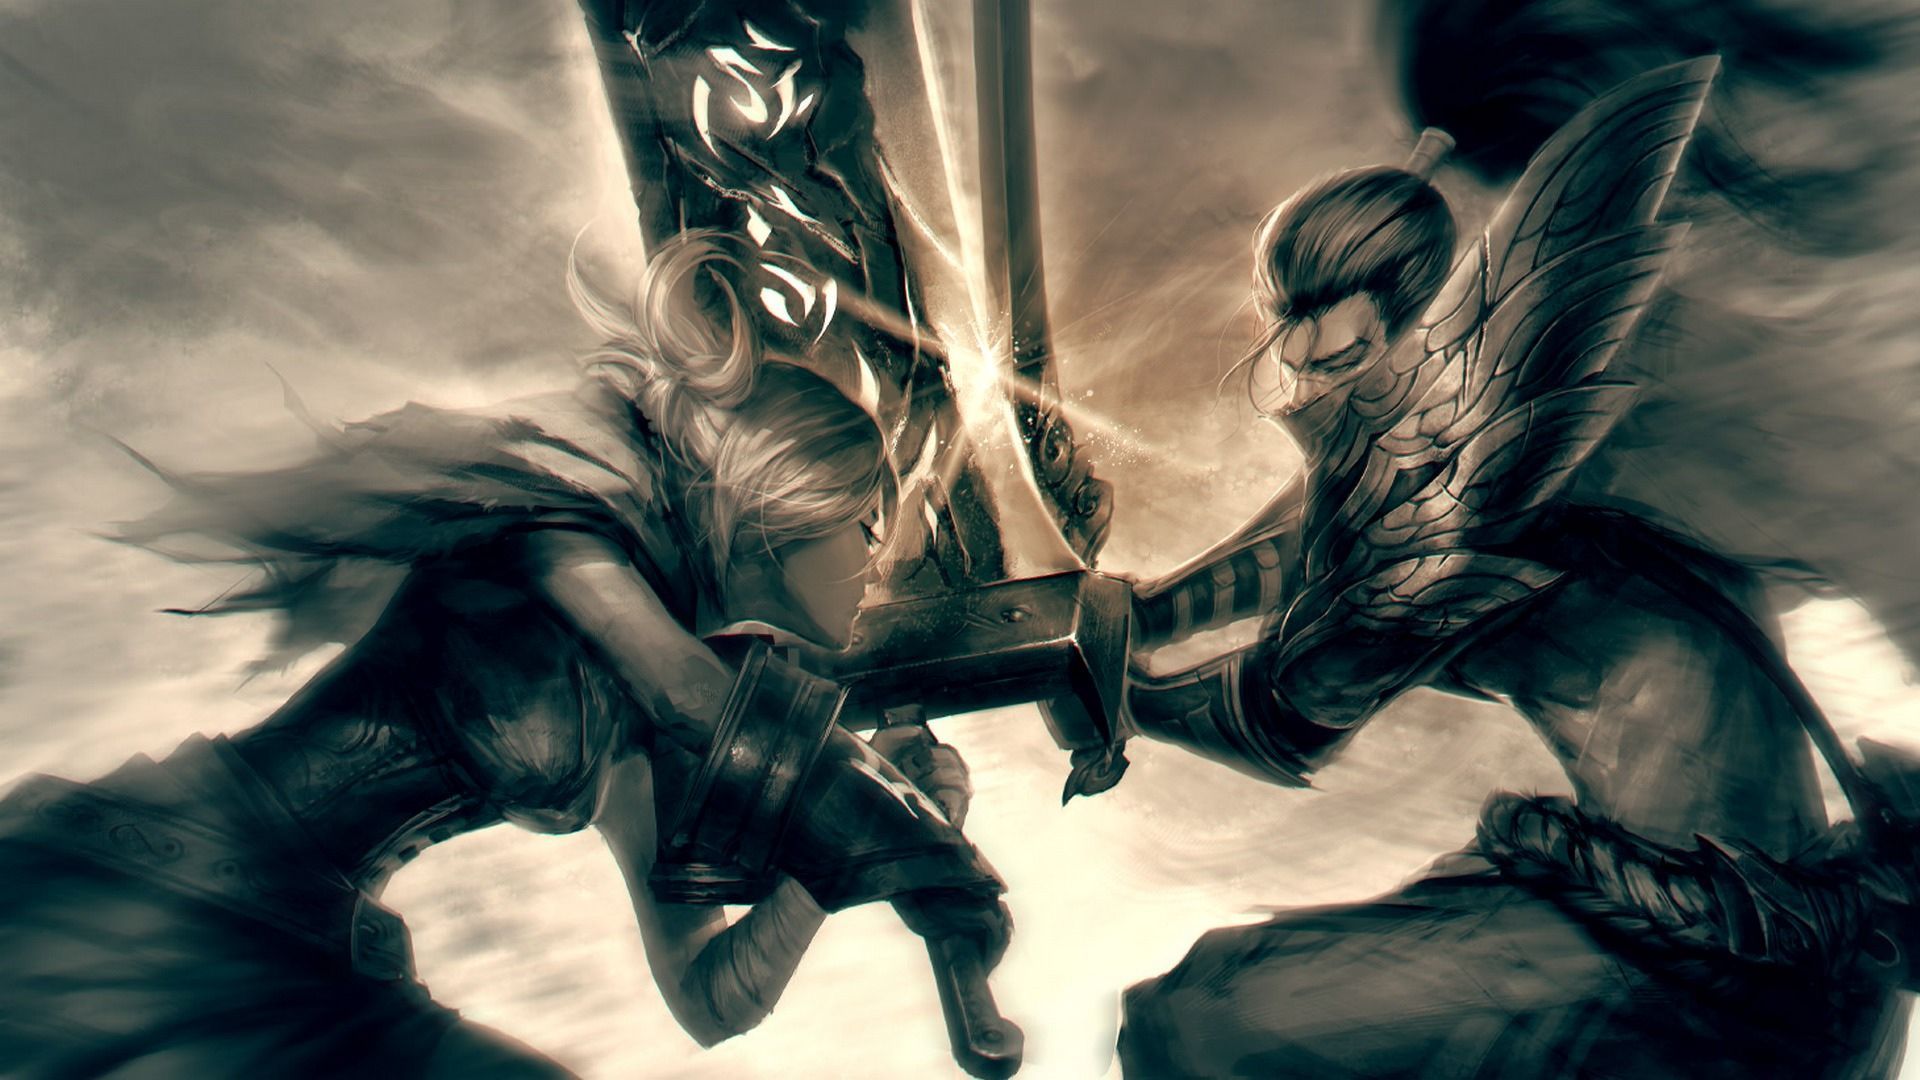 Download Wallpaper 1920x1080 League of legends, Yasuo, Riven, The ...